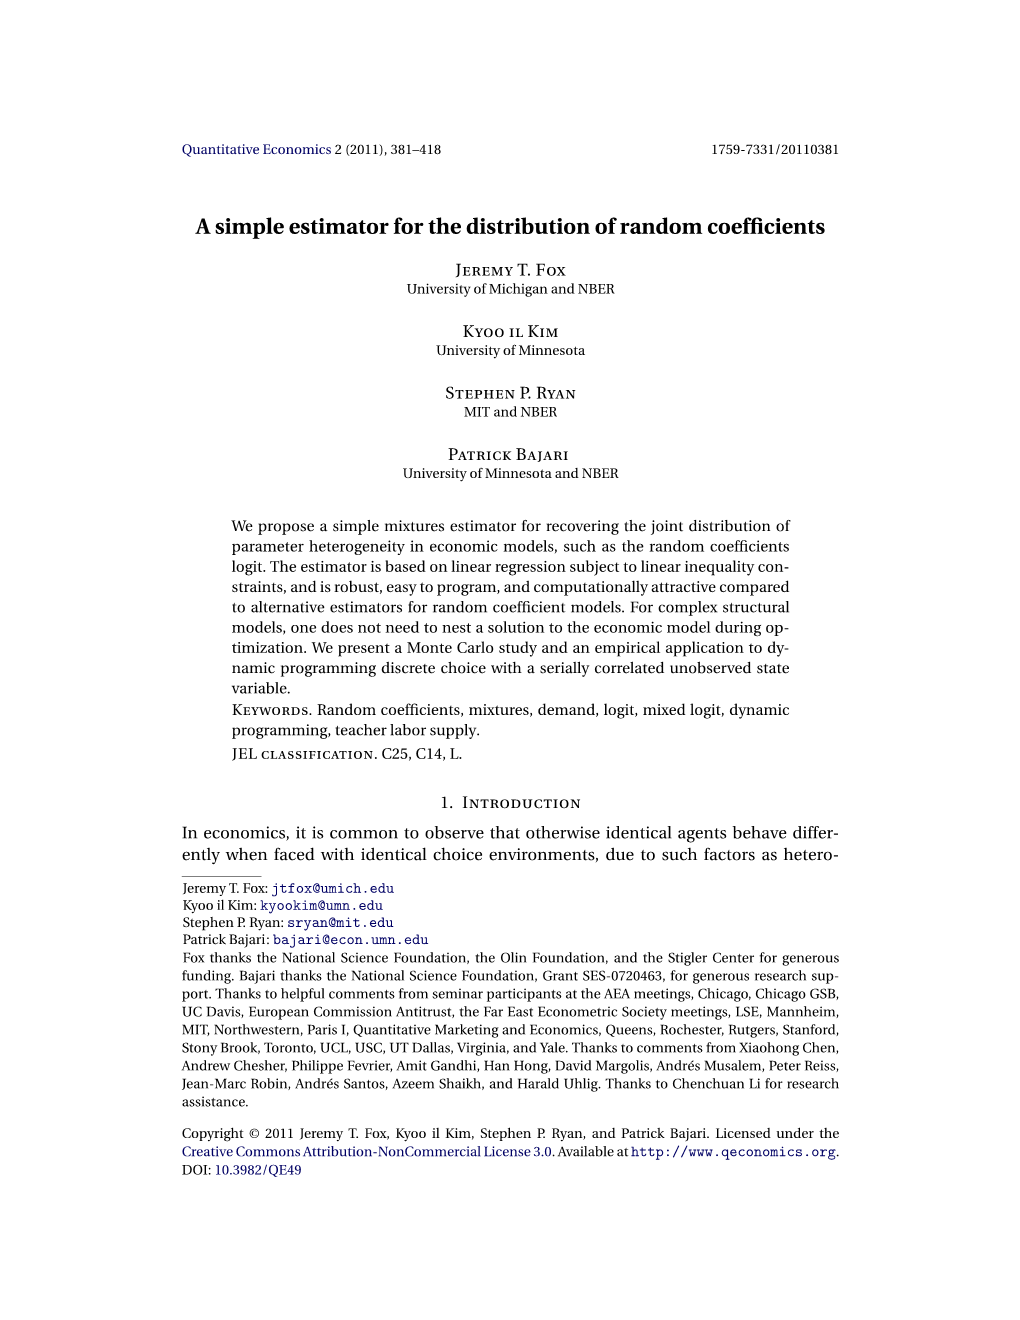 A Simple Estimator for the Distribution of Random Coefficients